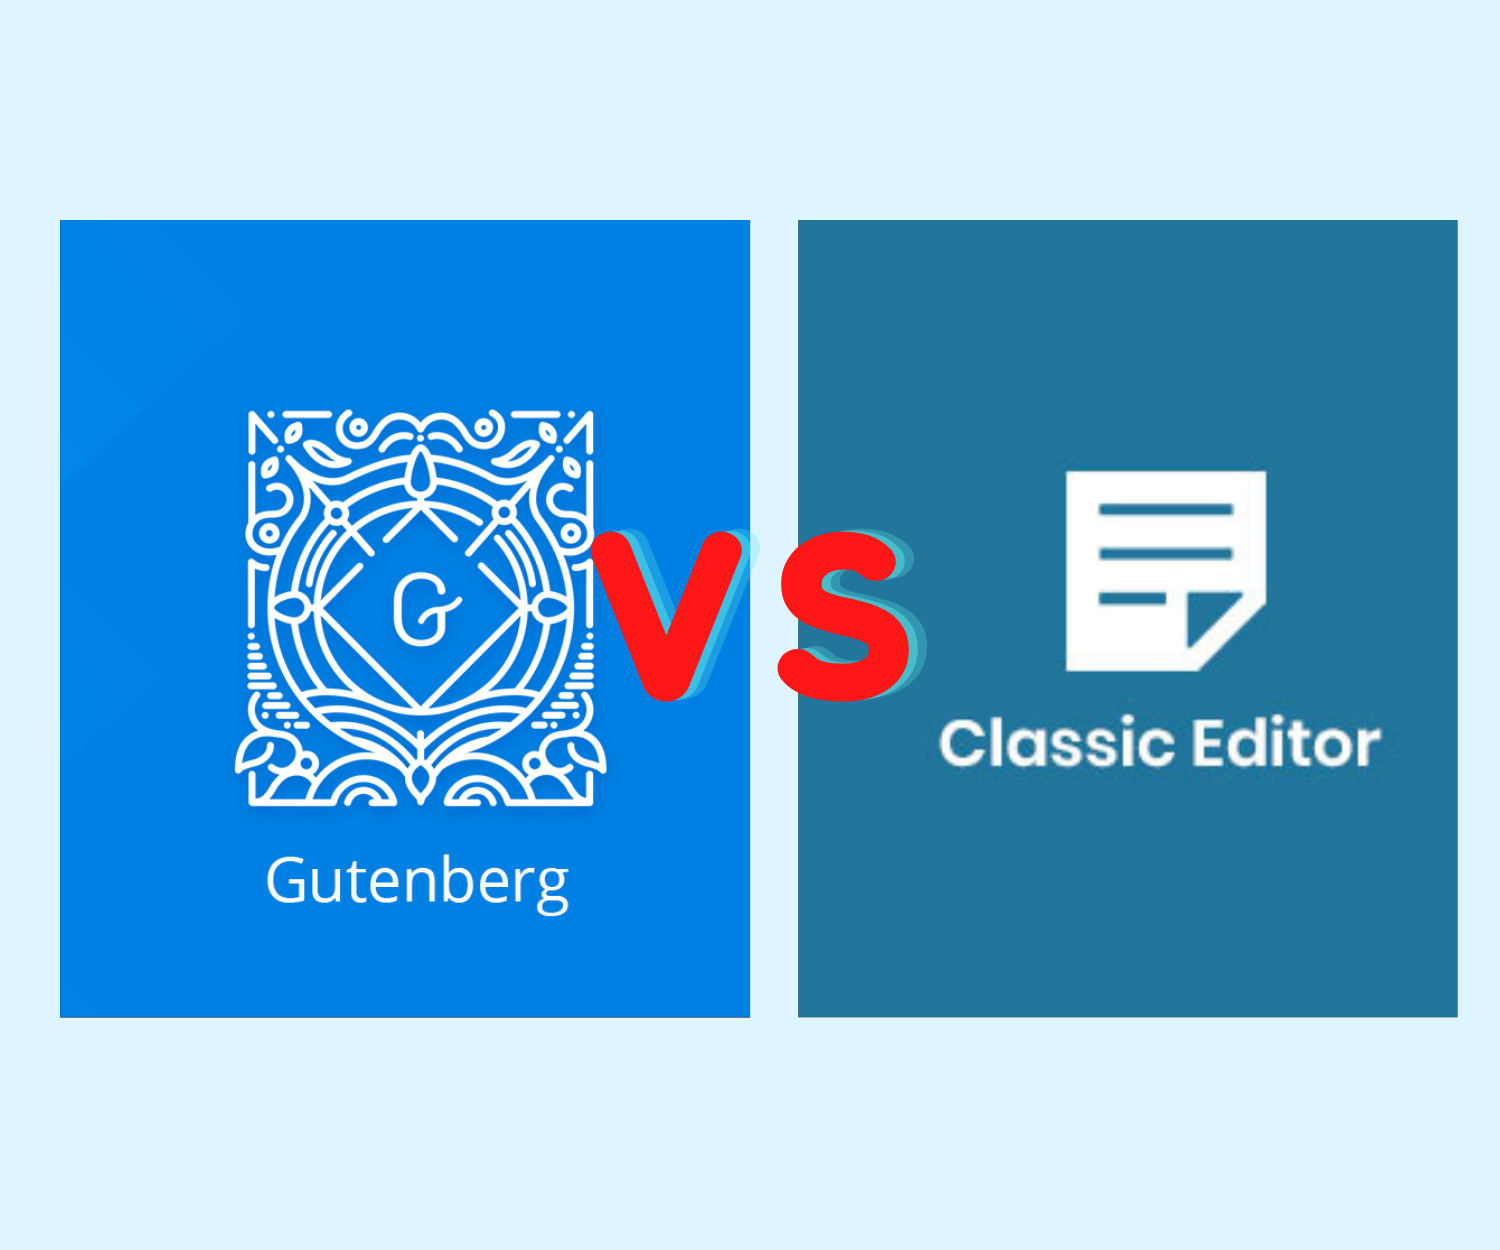 Gutenberg Vs Classic Editor: Which is the greater choice for your site?